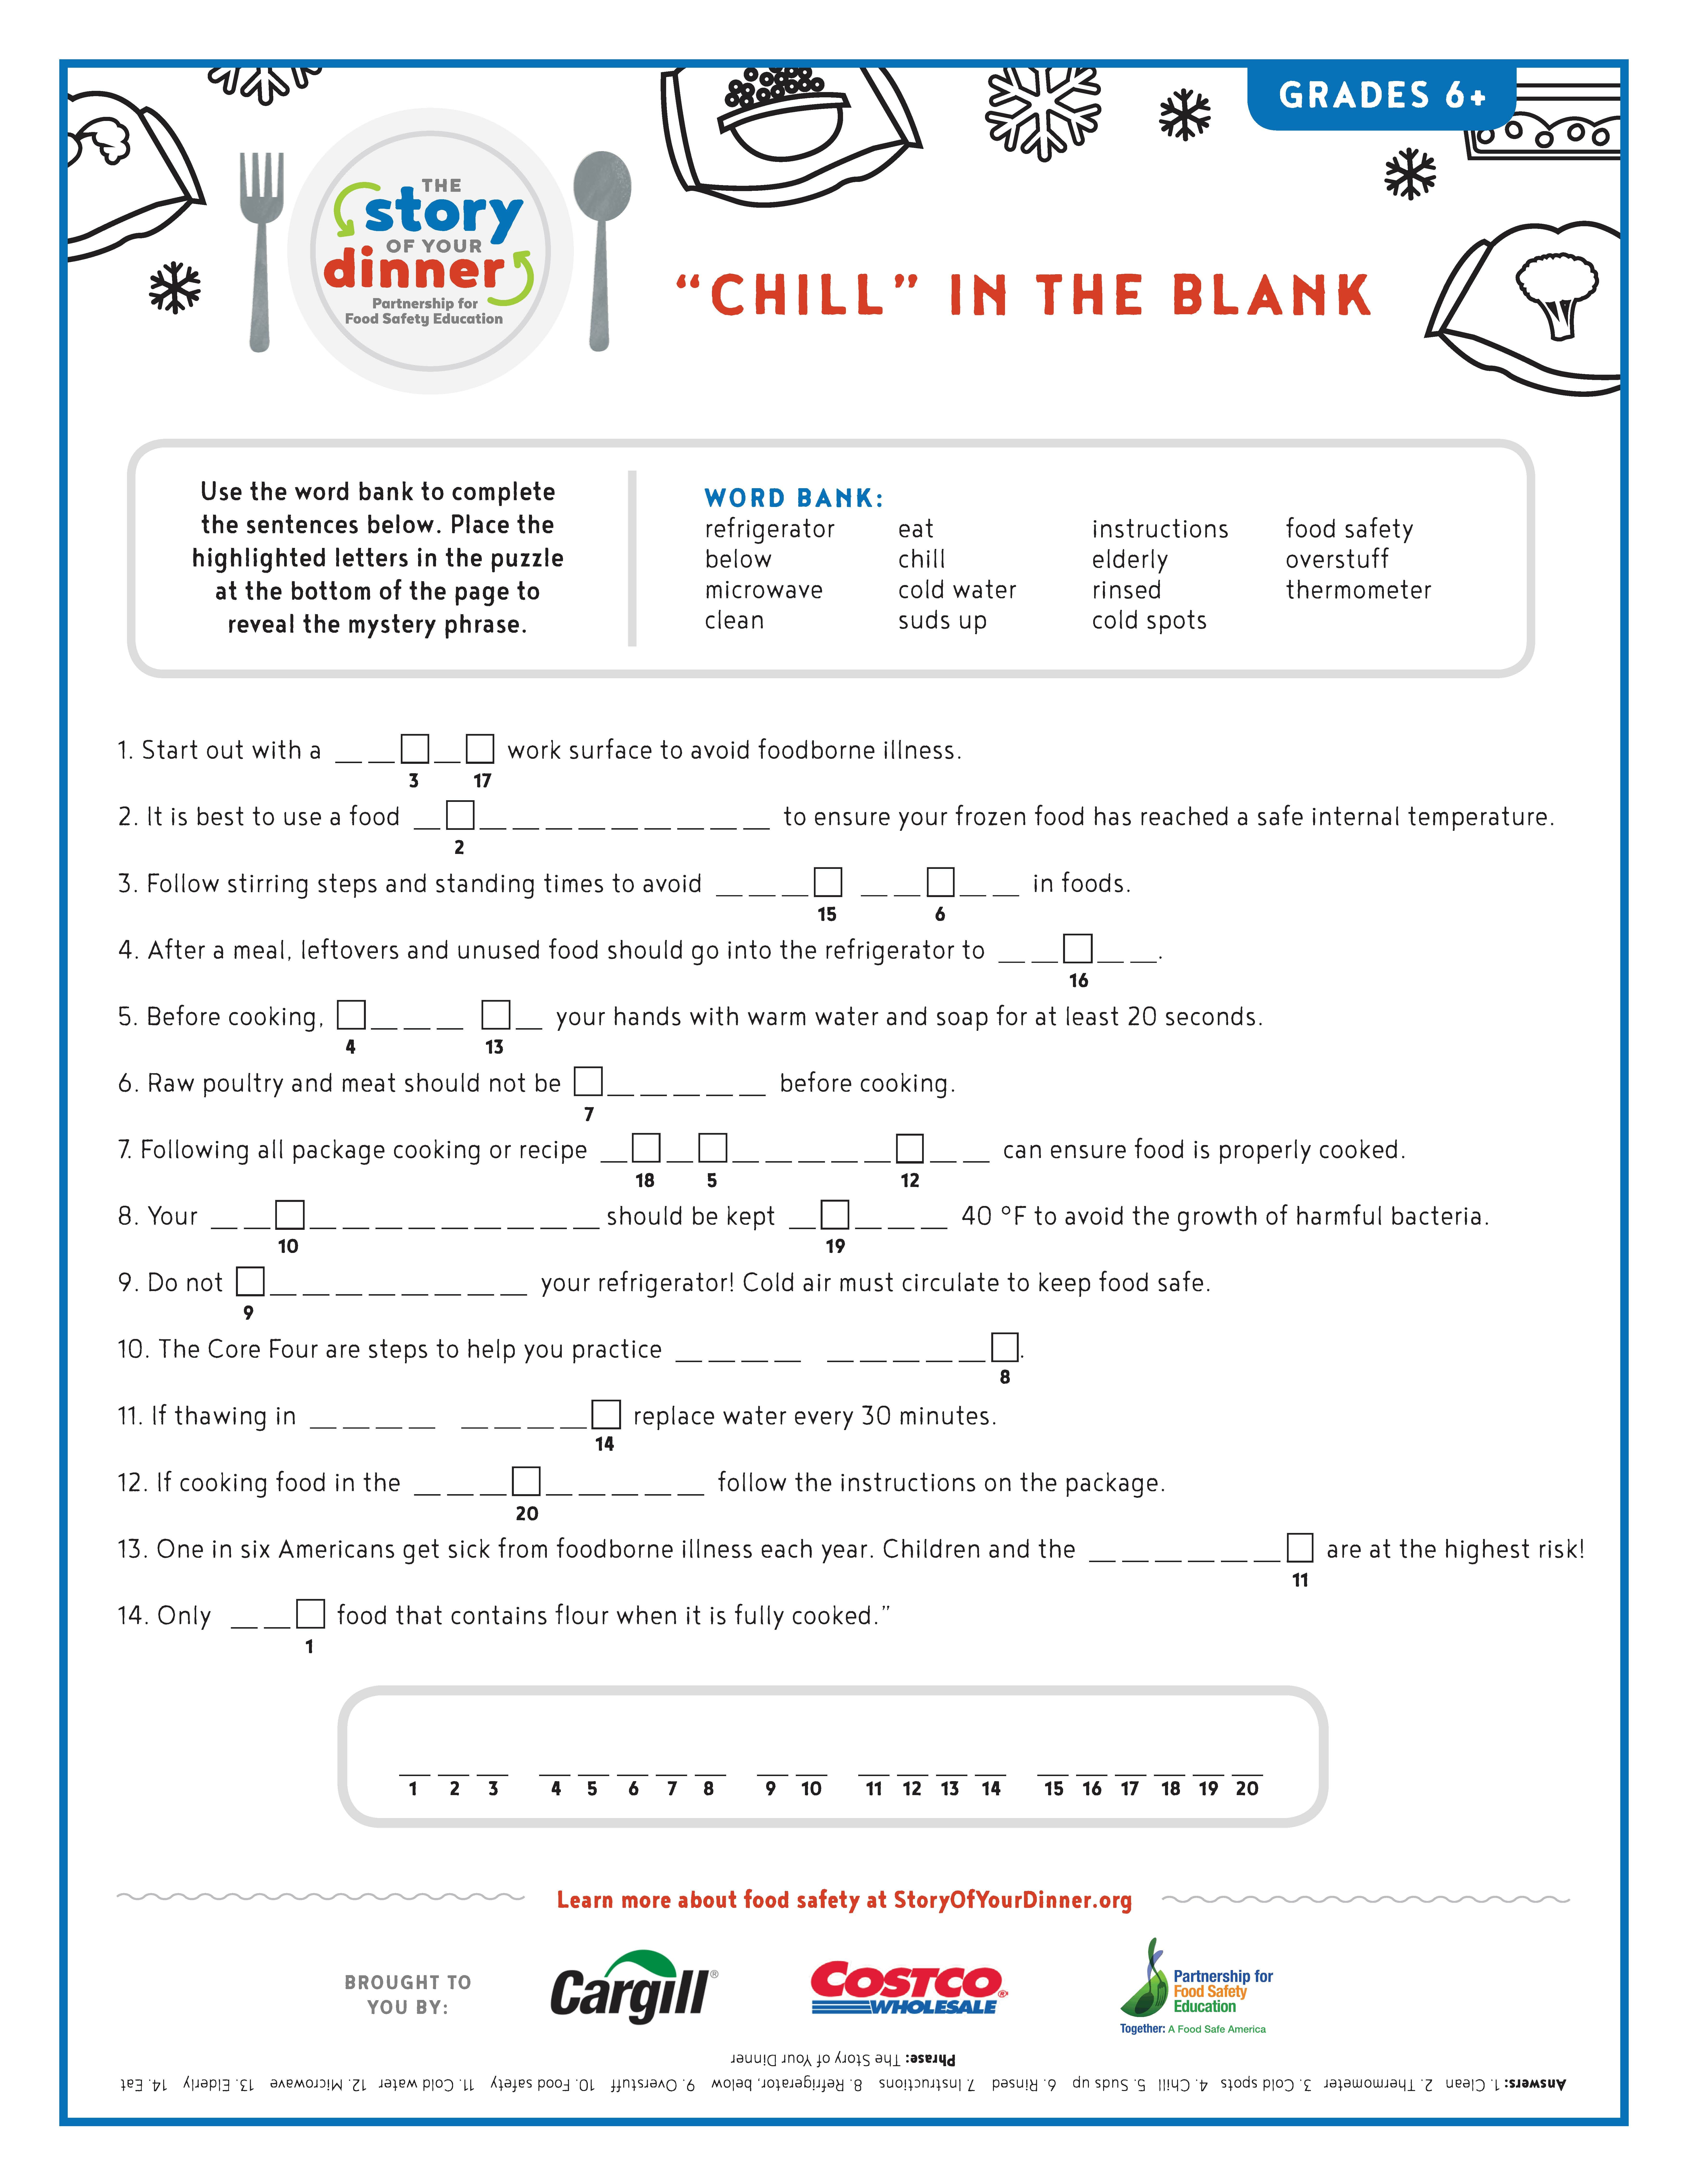 Chill in the Blank Activity Sheet Thumbnail